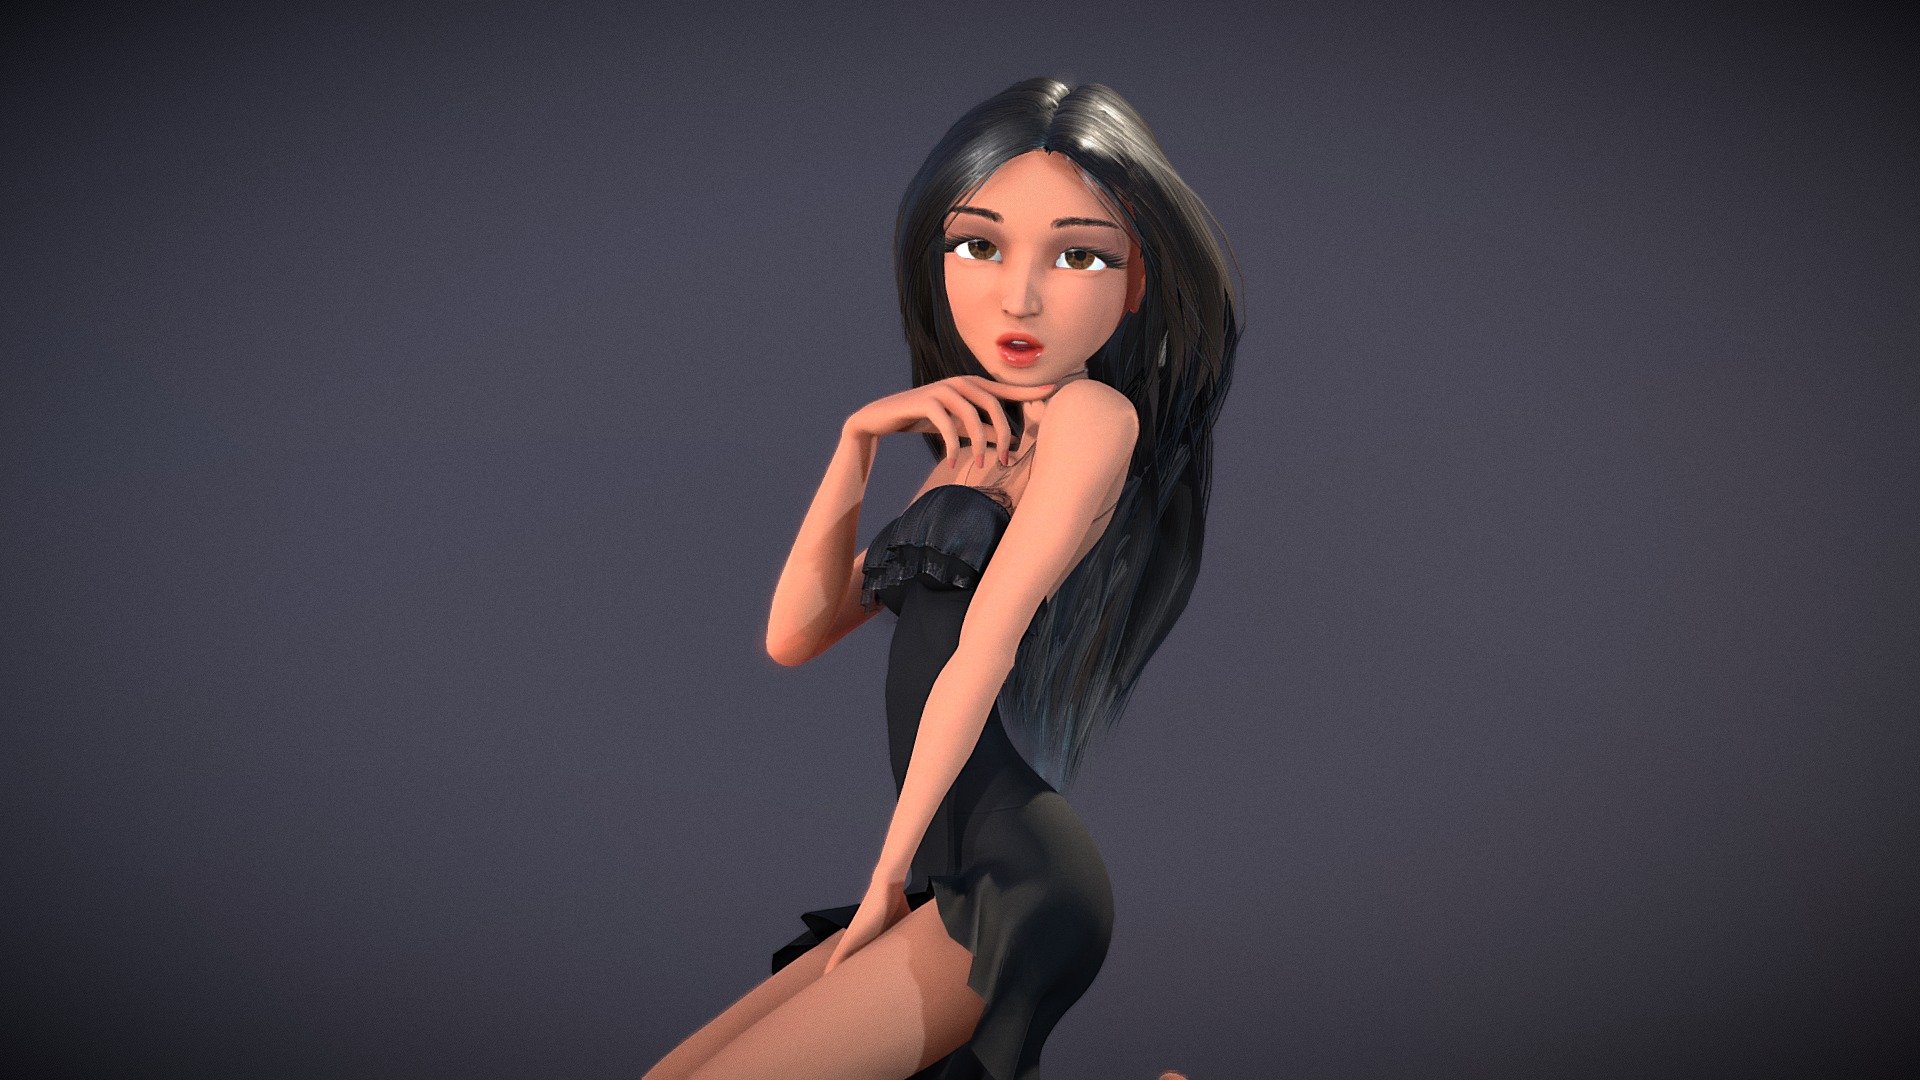 Ming Mei Rigged Woman Character 3d Model By Tomcat Tjentom1 [7182d67] Sketchfab